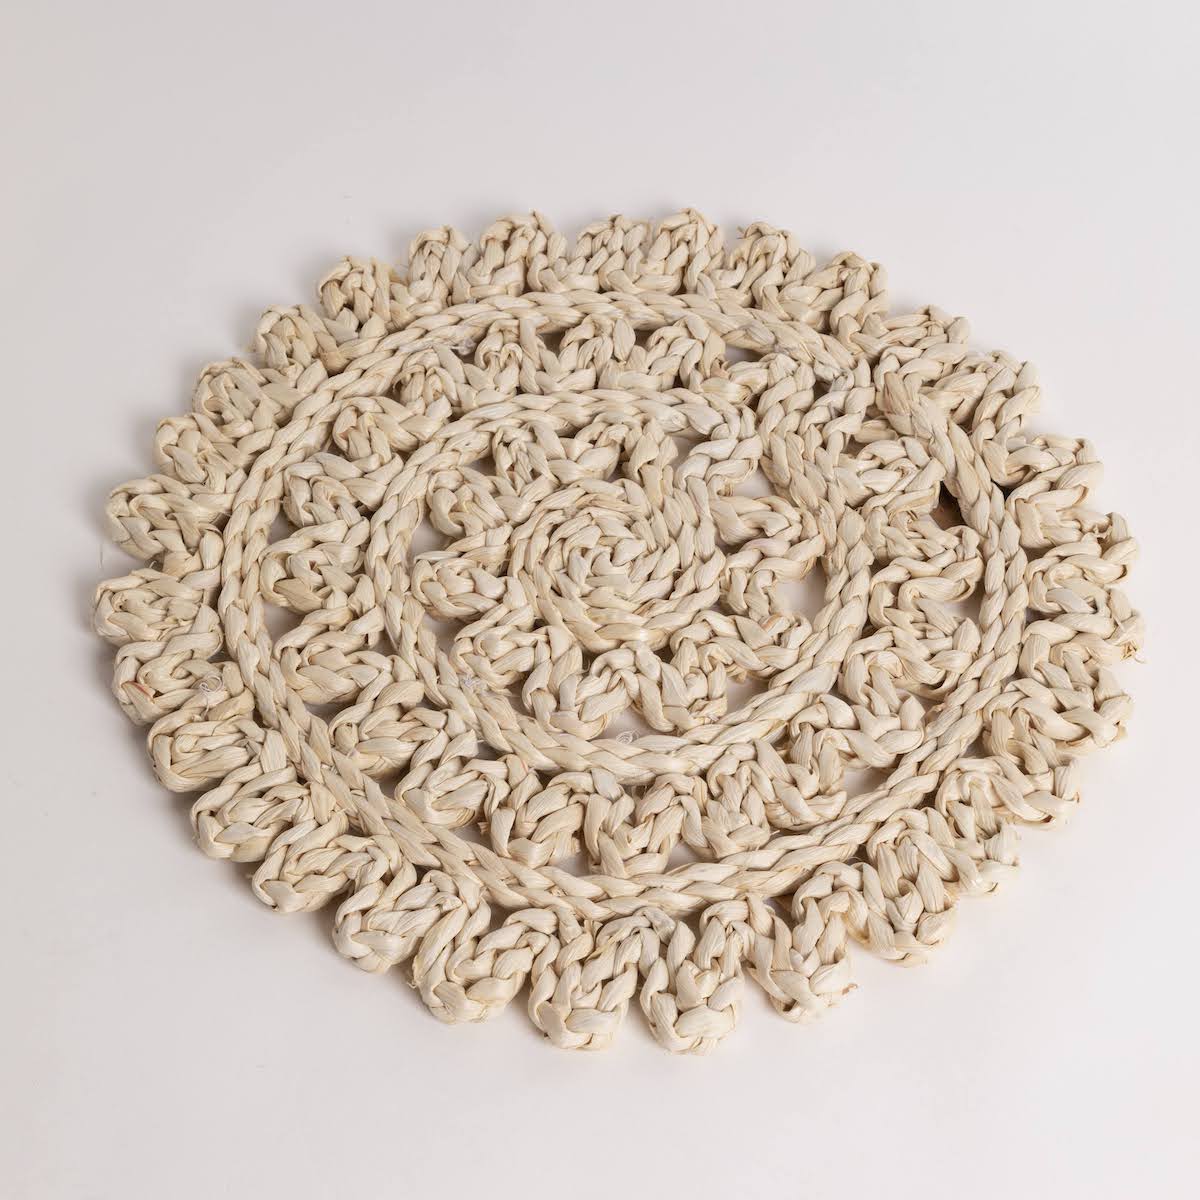 Woven Straw Placemat - P I C N I C 